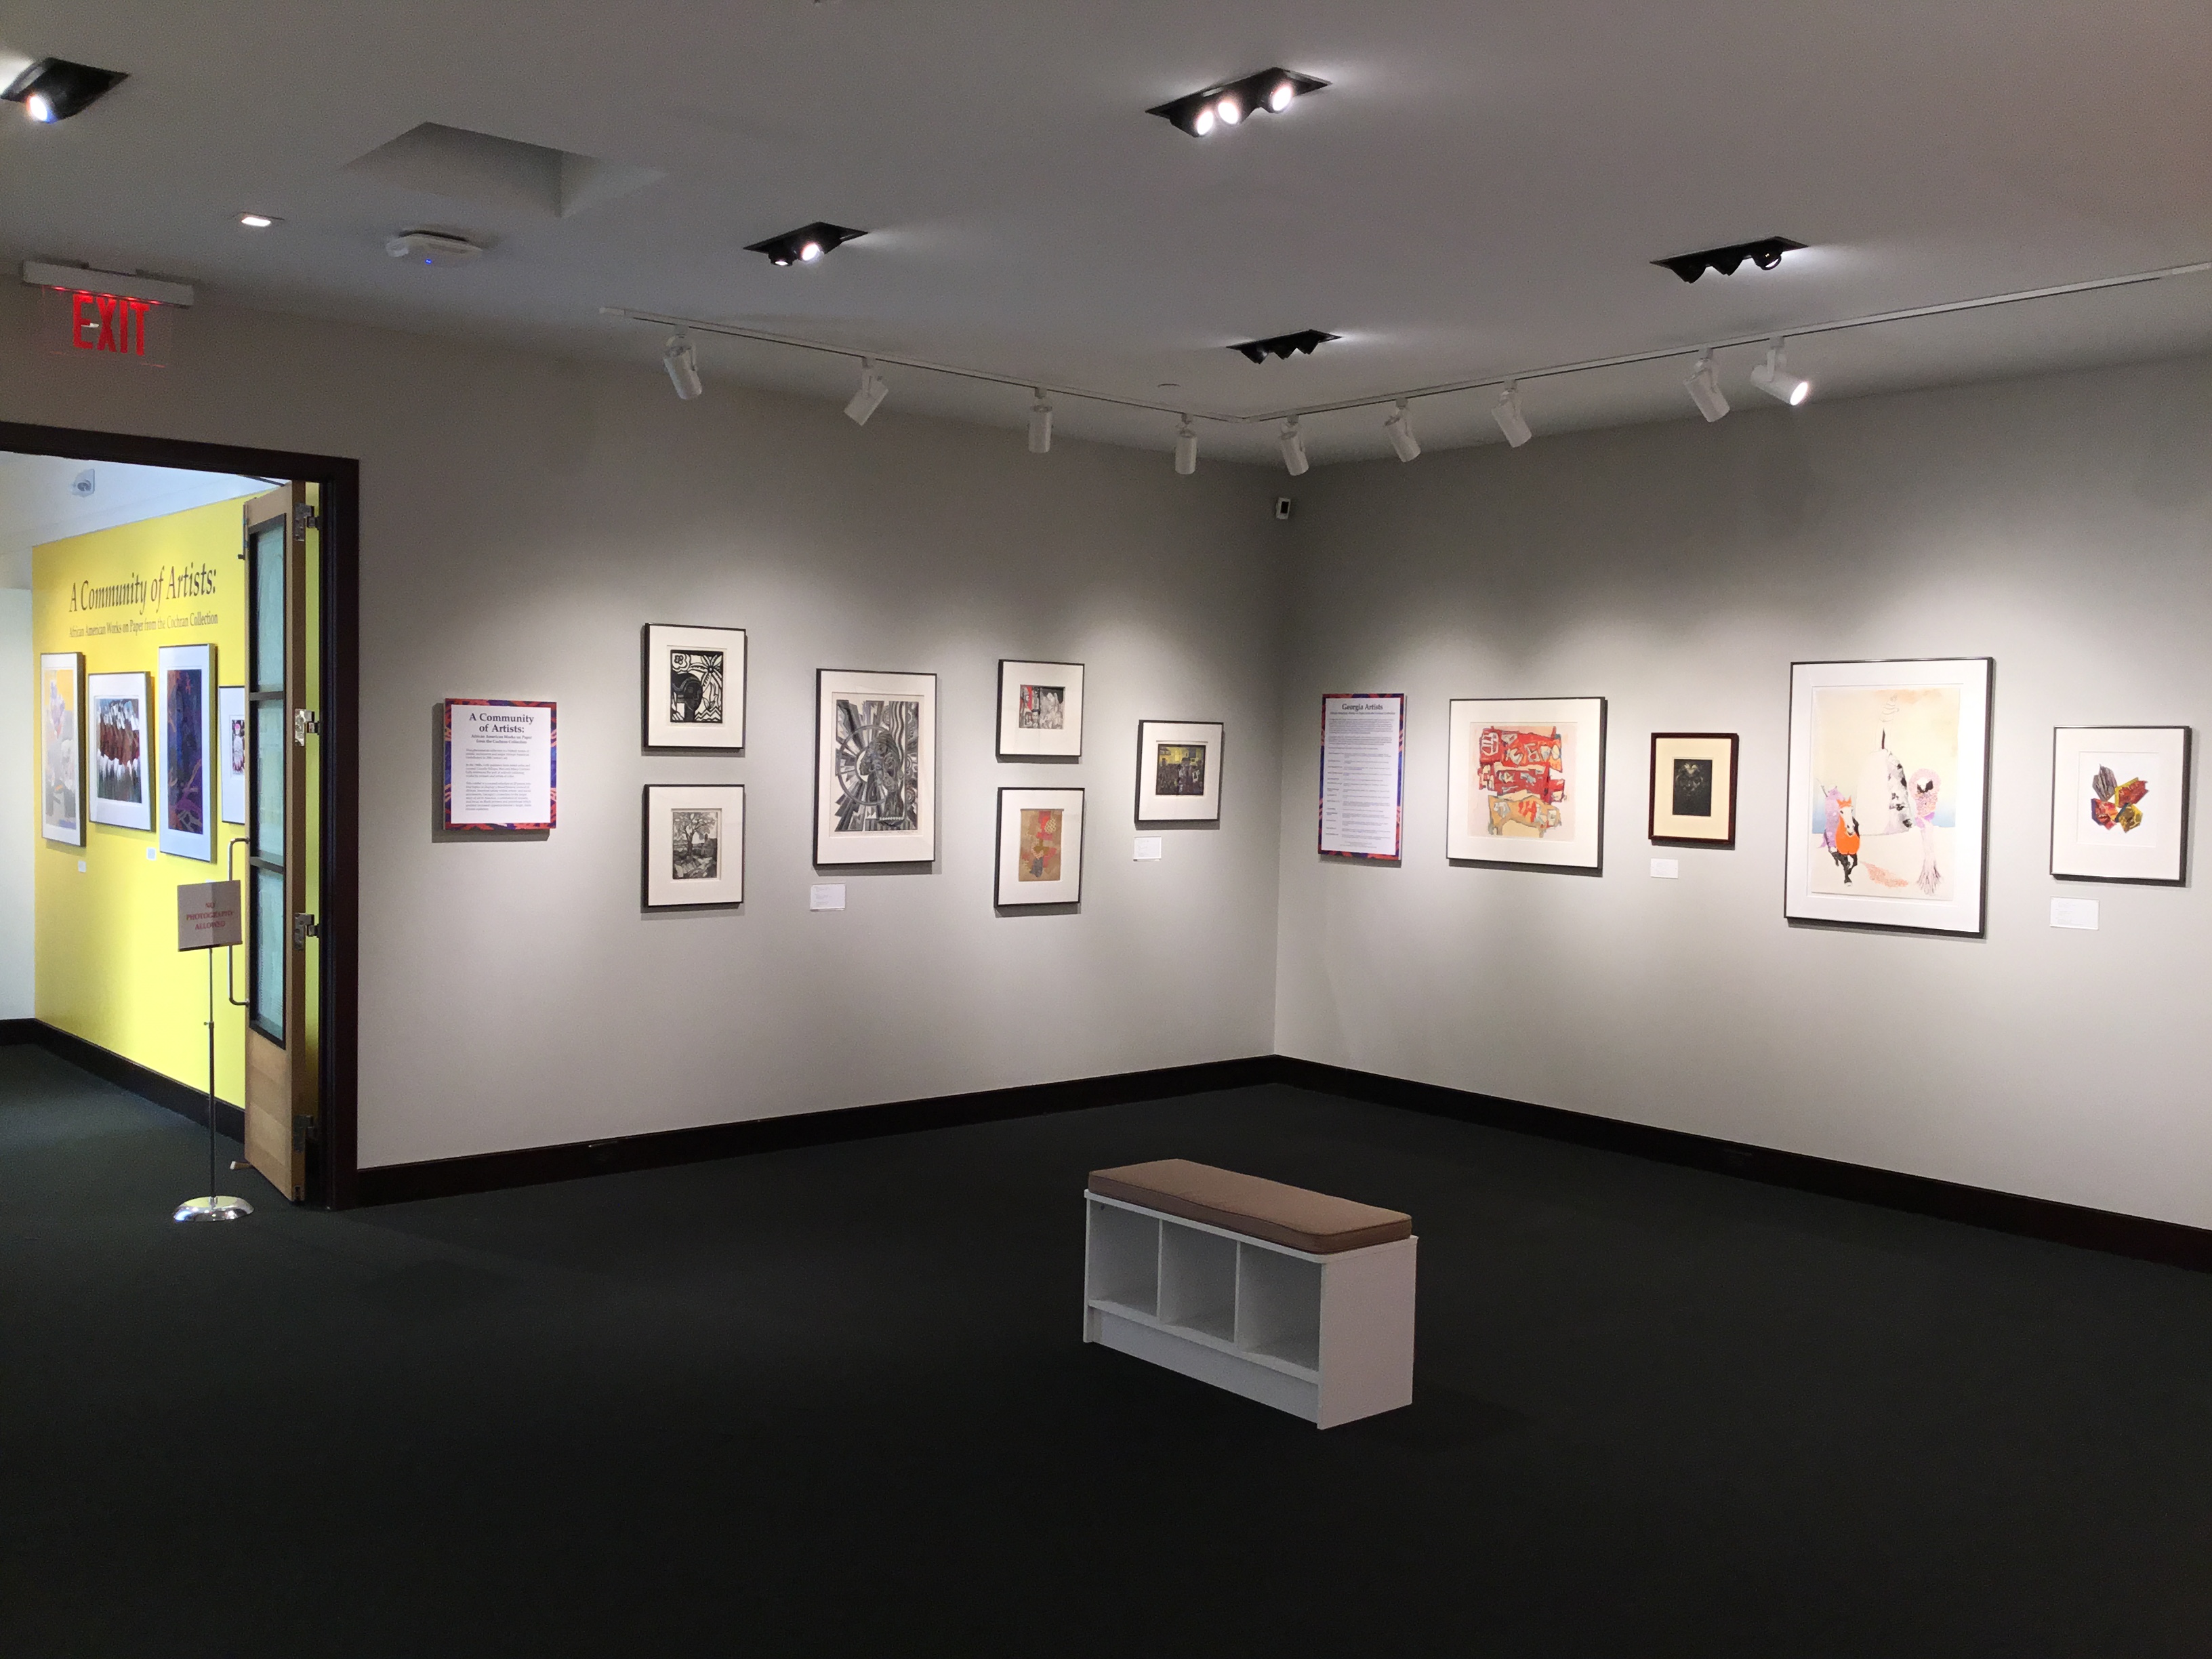 An image of the front corner of the main gallery that features multiple framed pieces, as well as placards that read “A Community of Artists” and “Georgia Artists”.